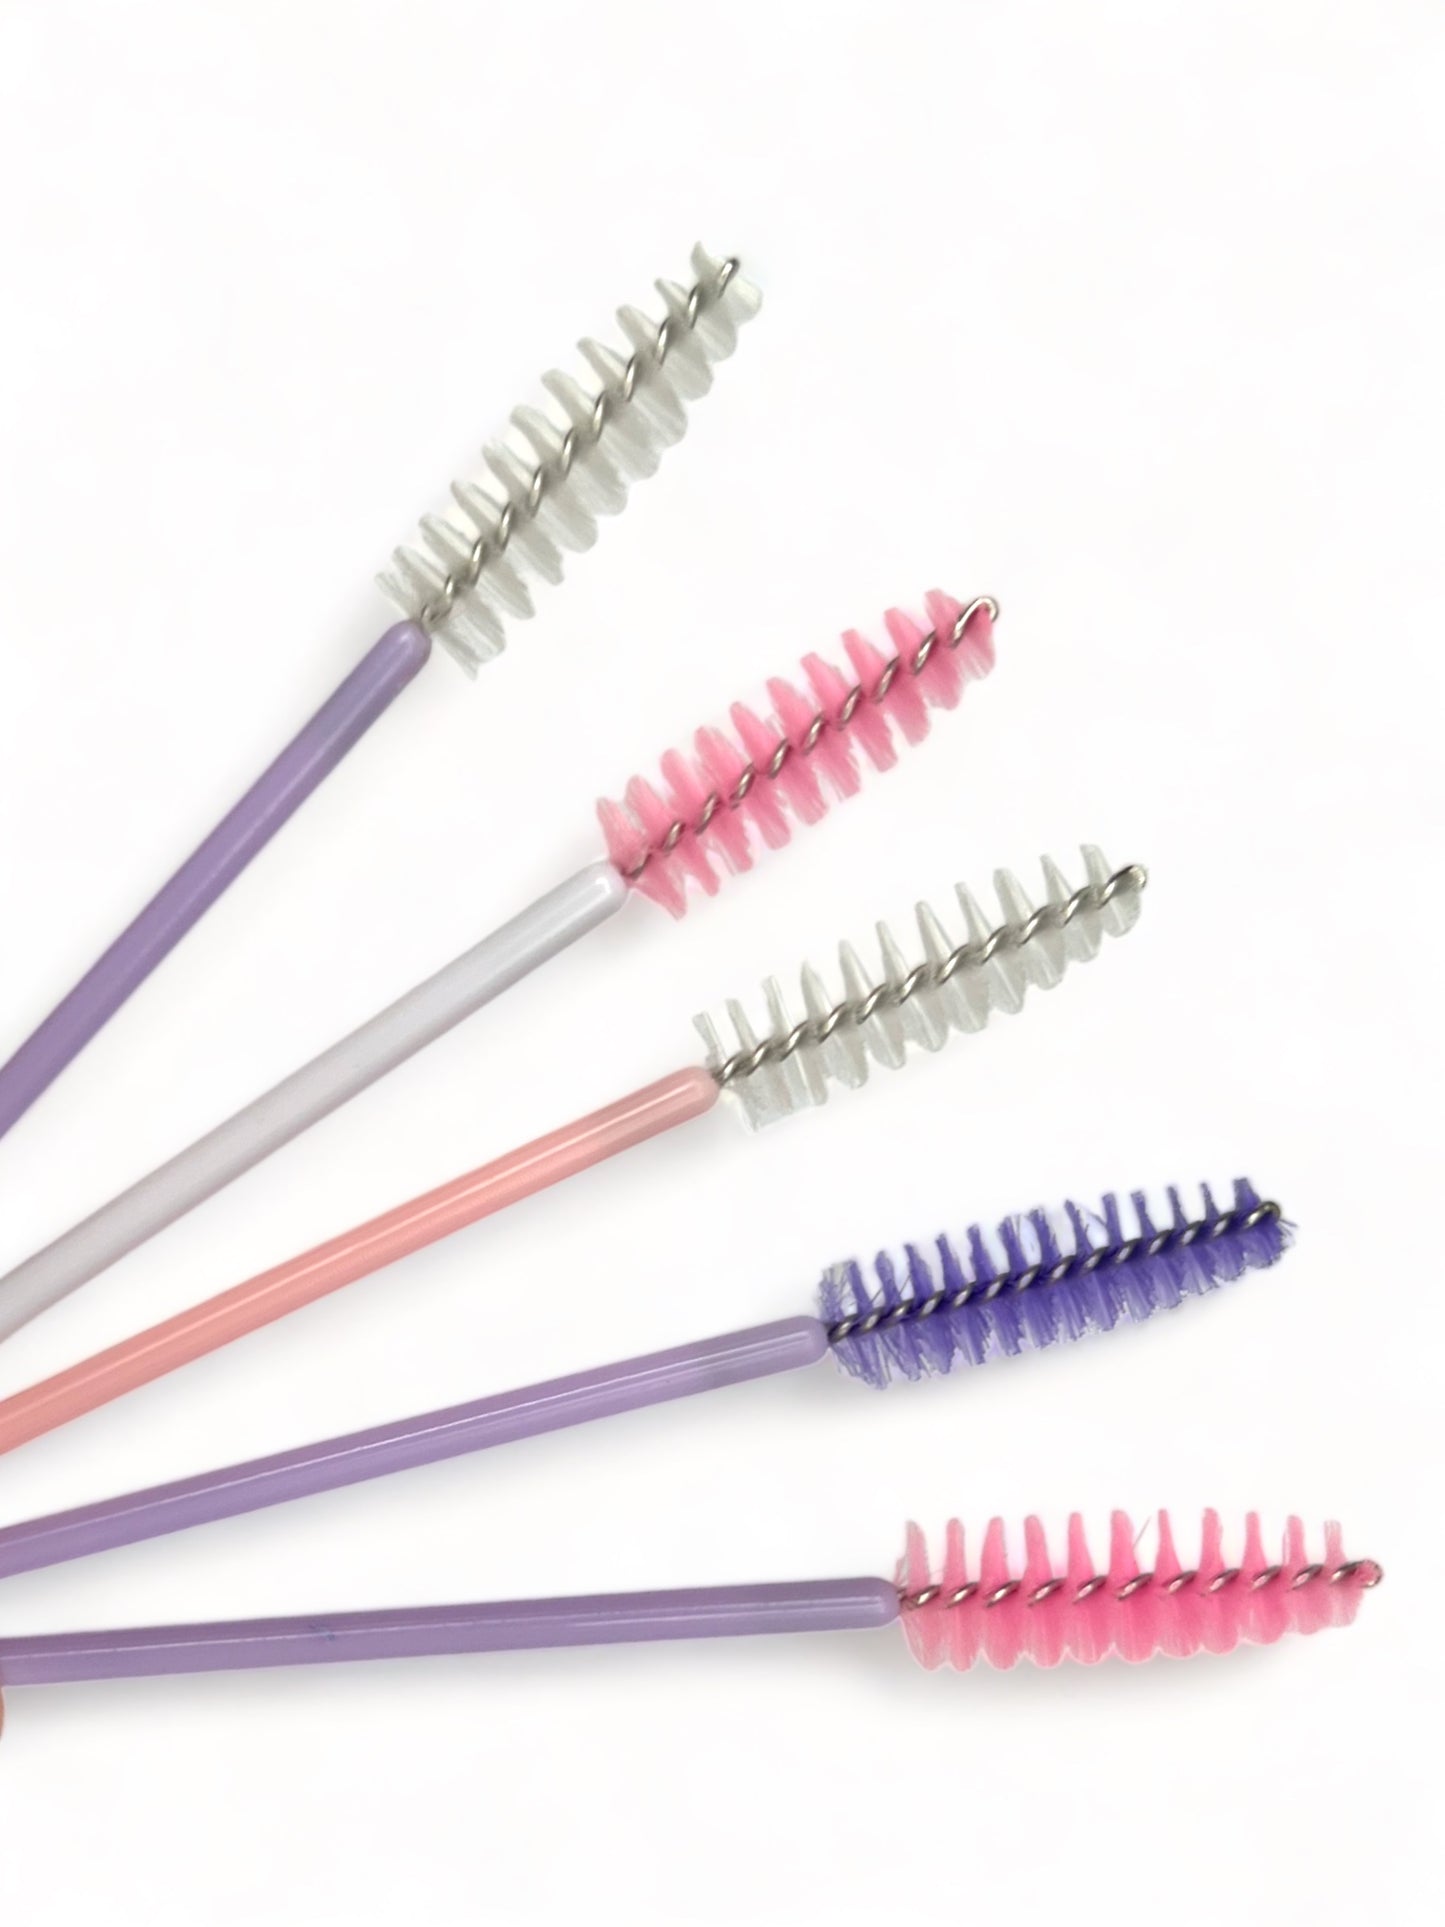 New Lash Brushes - Pack of 50